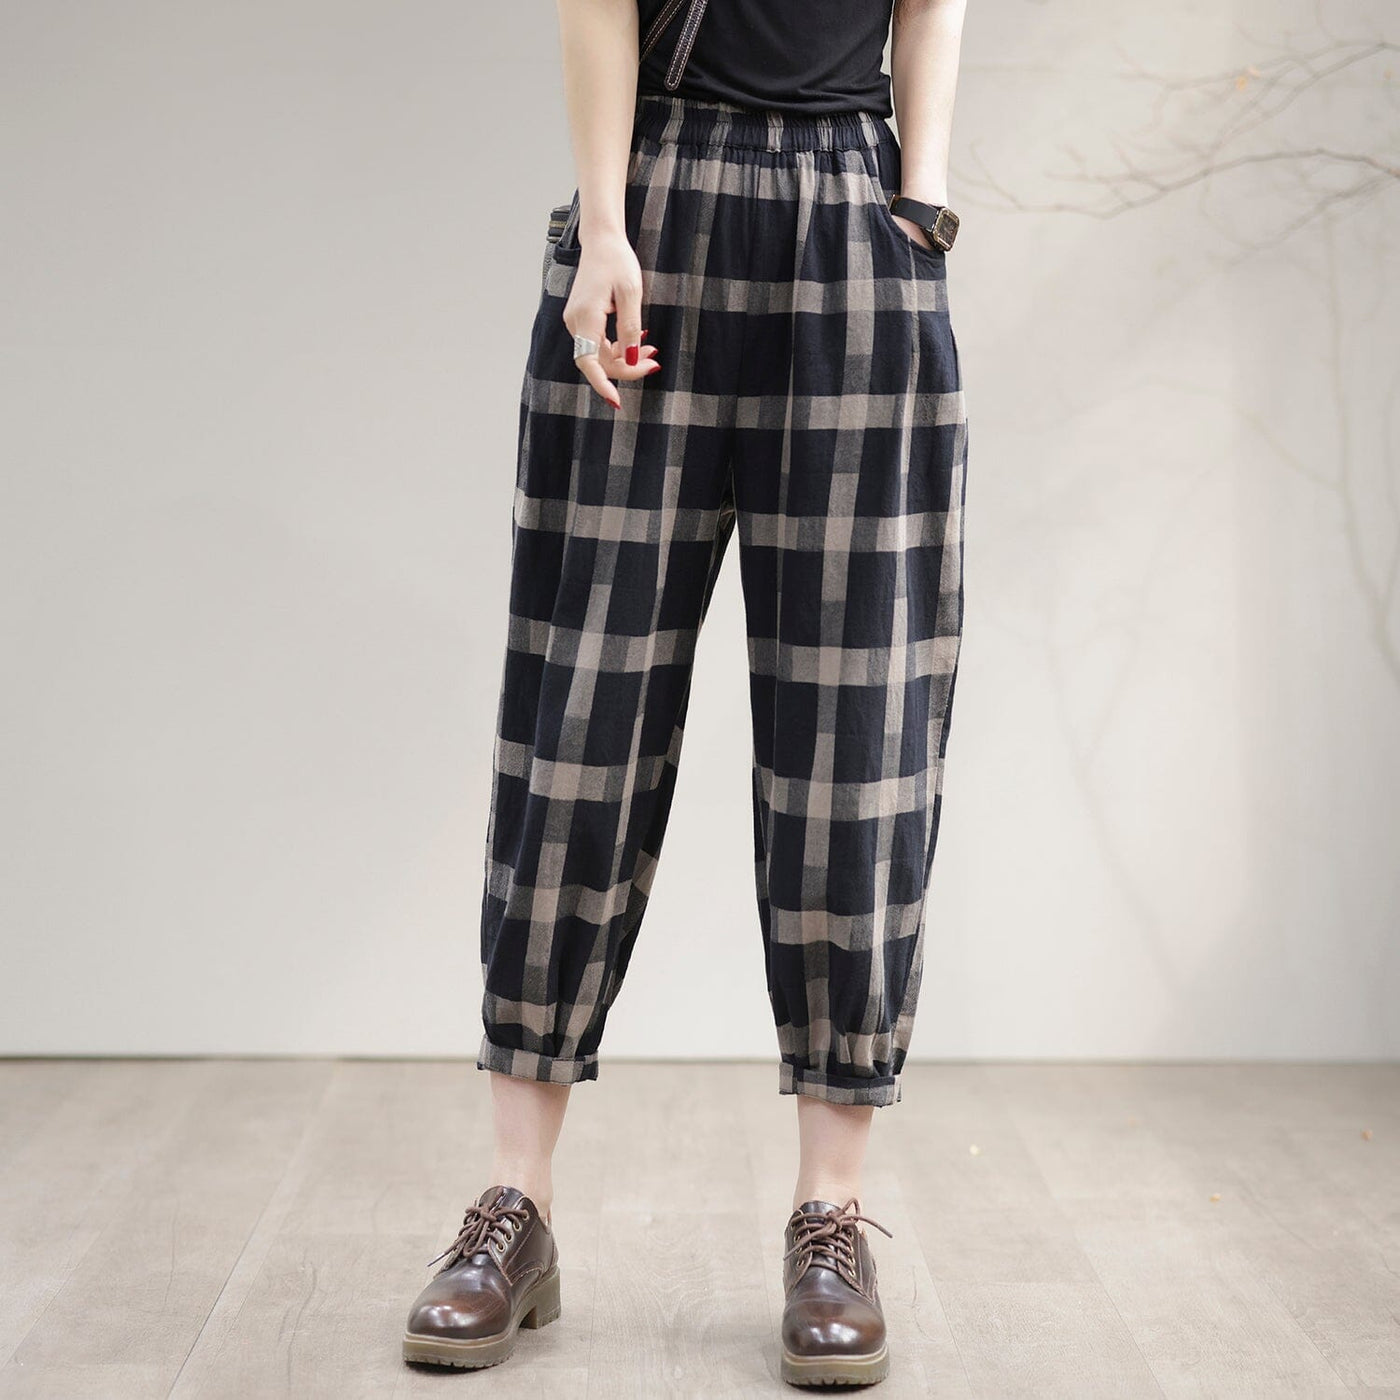 Women Spring Casual Loose Cotton Plaid Harem Pants Feb 2023 New Arrival One Size Navy 